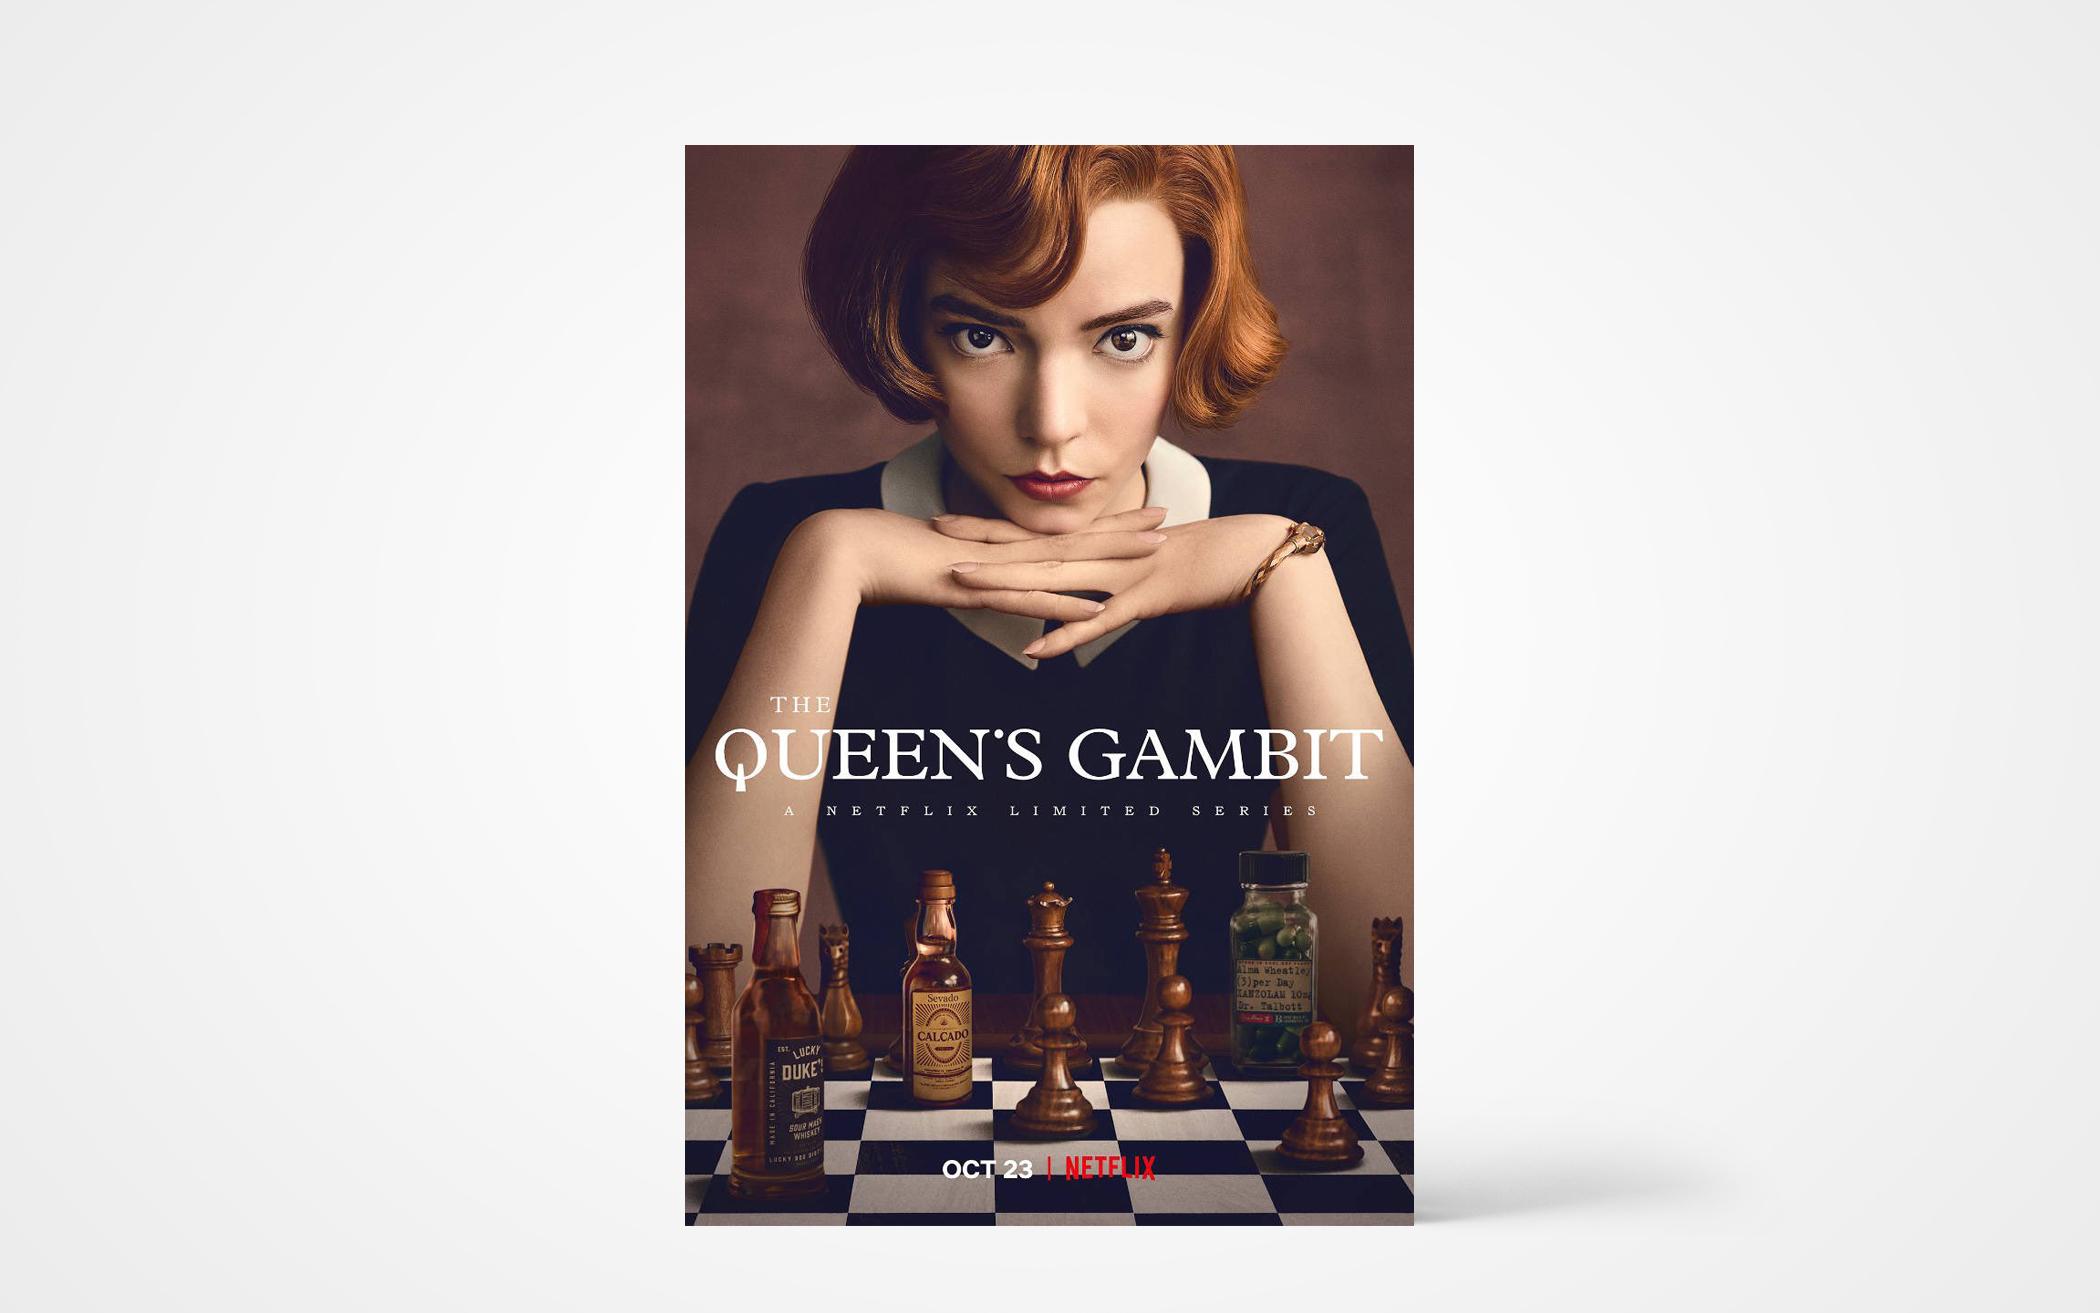 Marielle Heller on Playing Beth Harmon's Mother in The Queen's Gambit